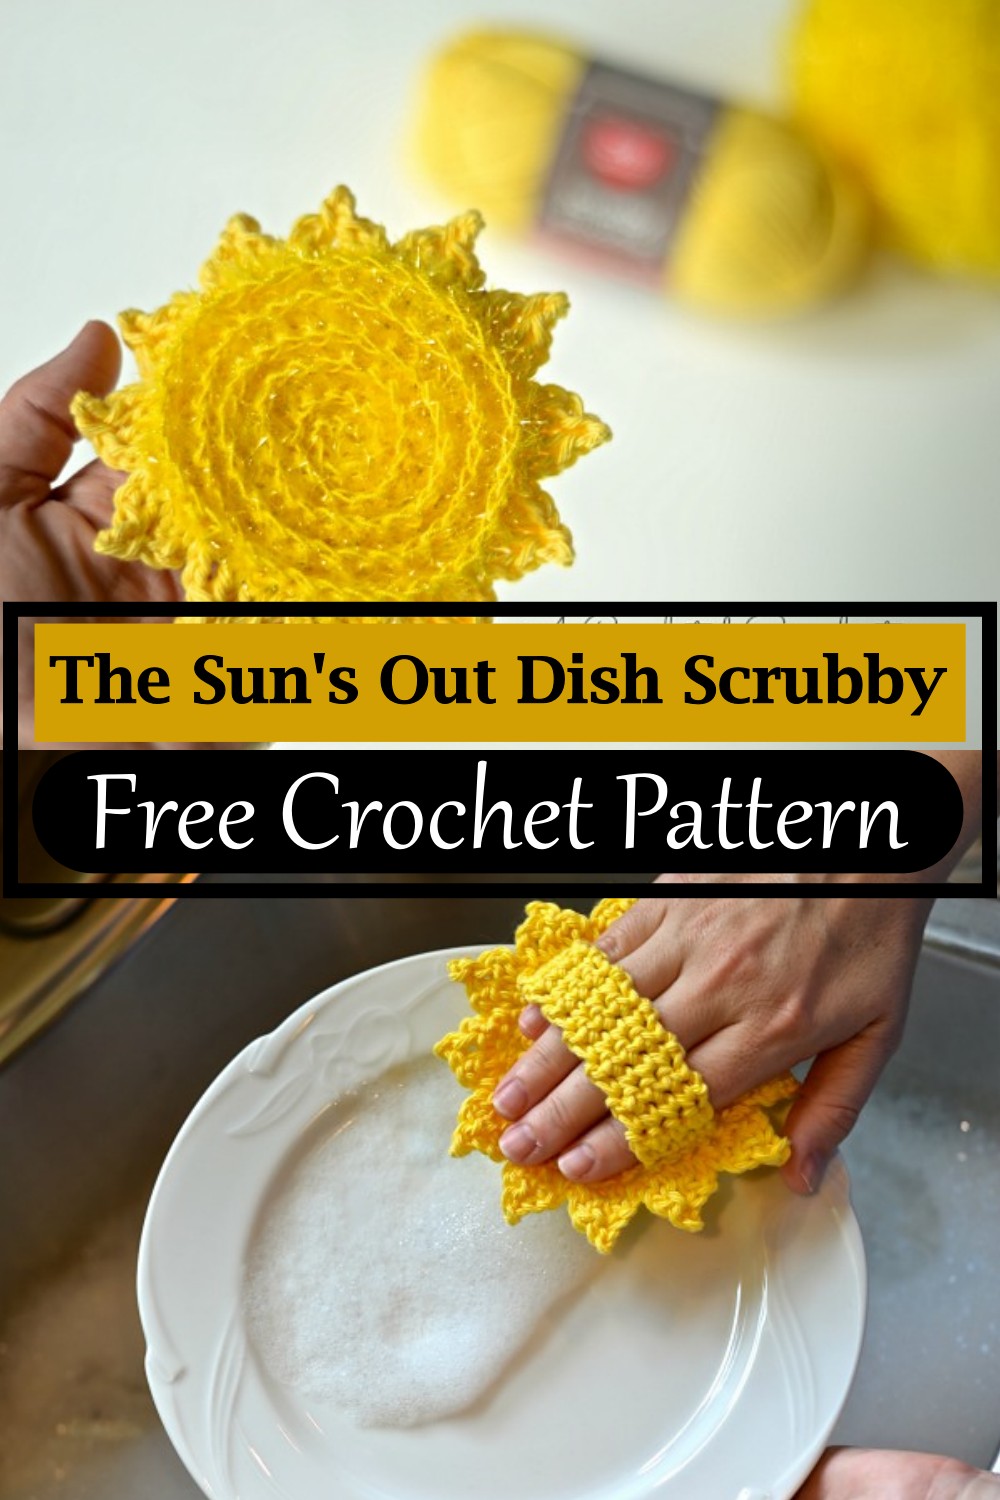 The Sun's Out Dish Scrubby